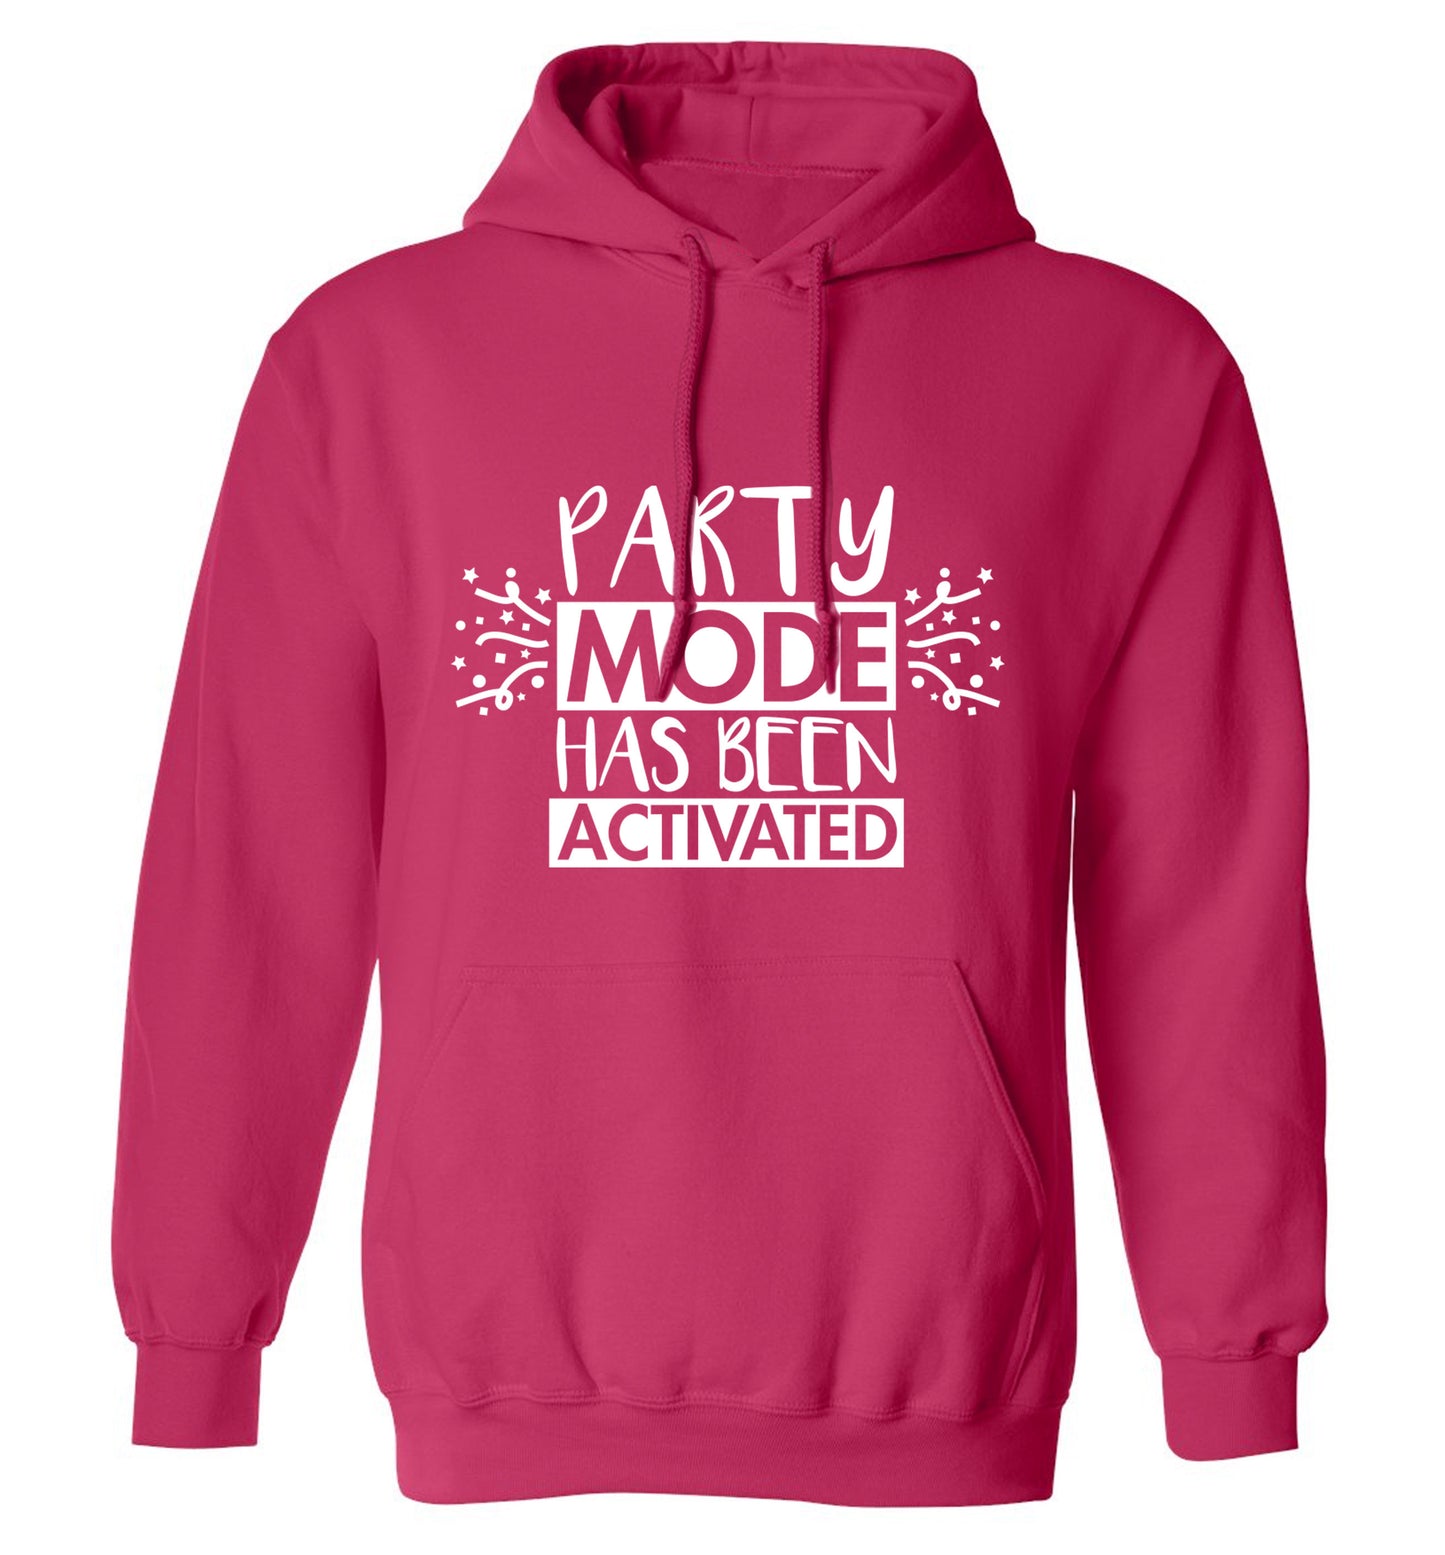 Please do not disturb party mode has been activated adults unisex pink hoodie 2XL